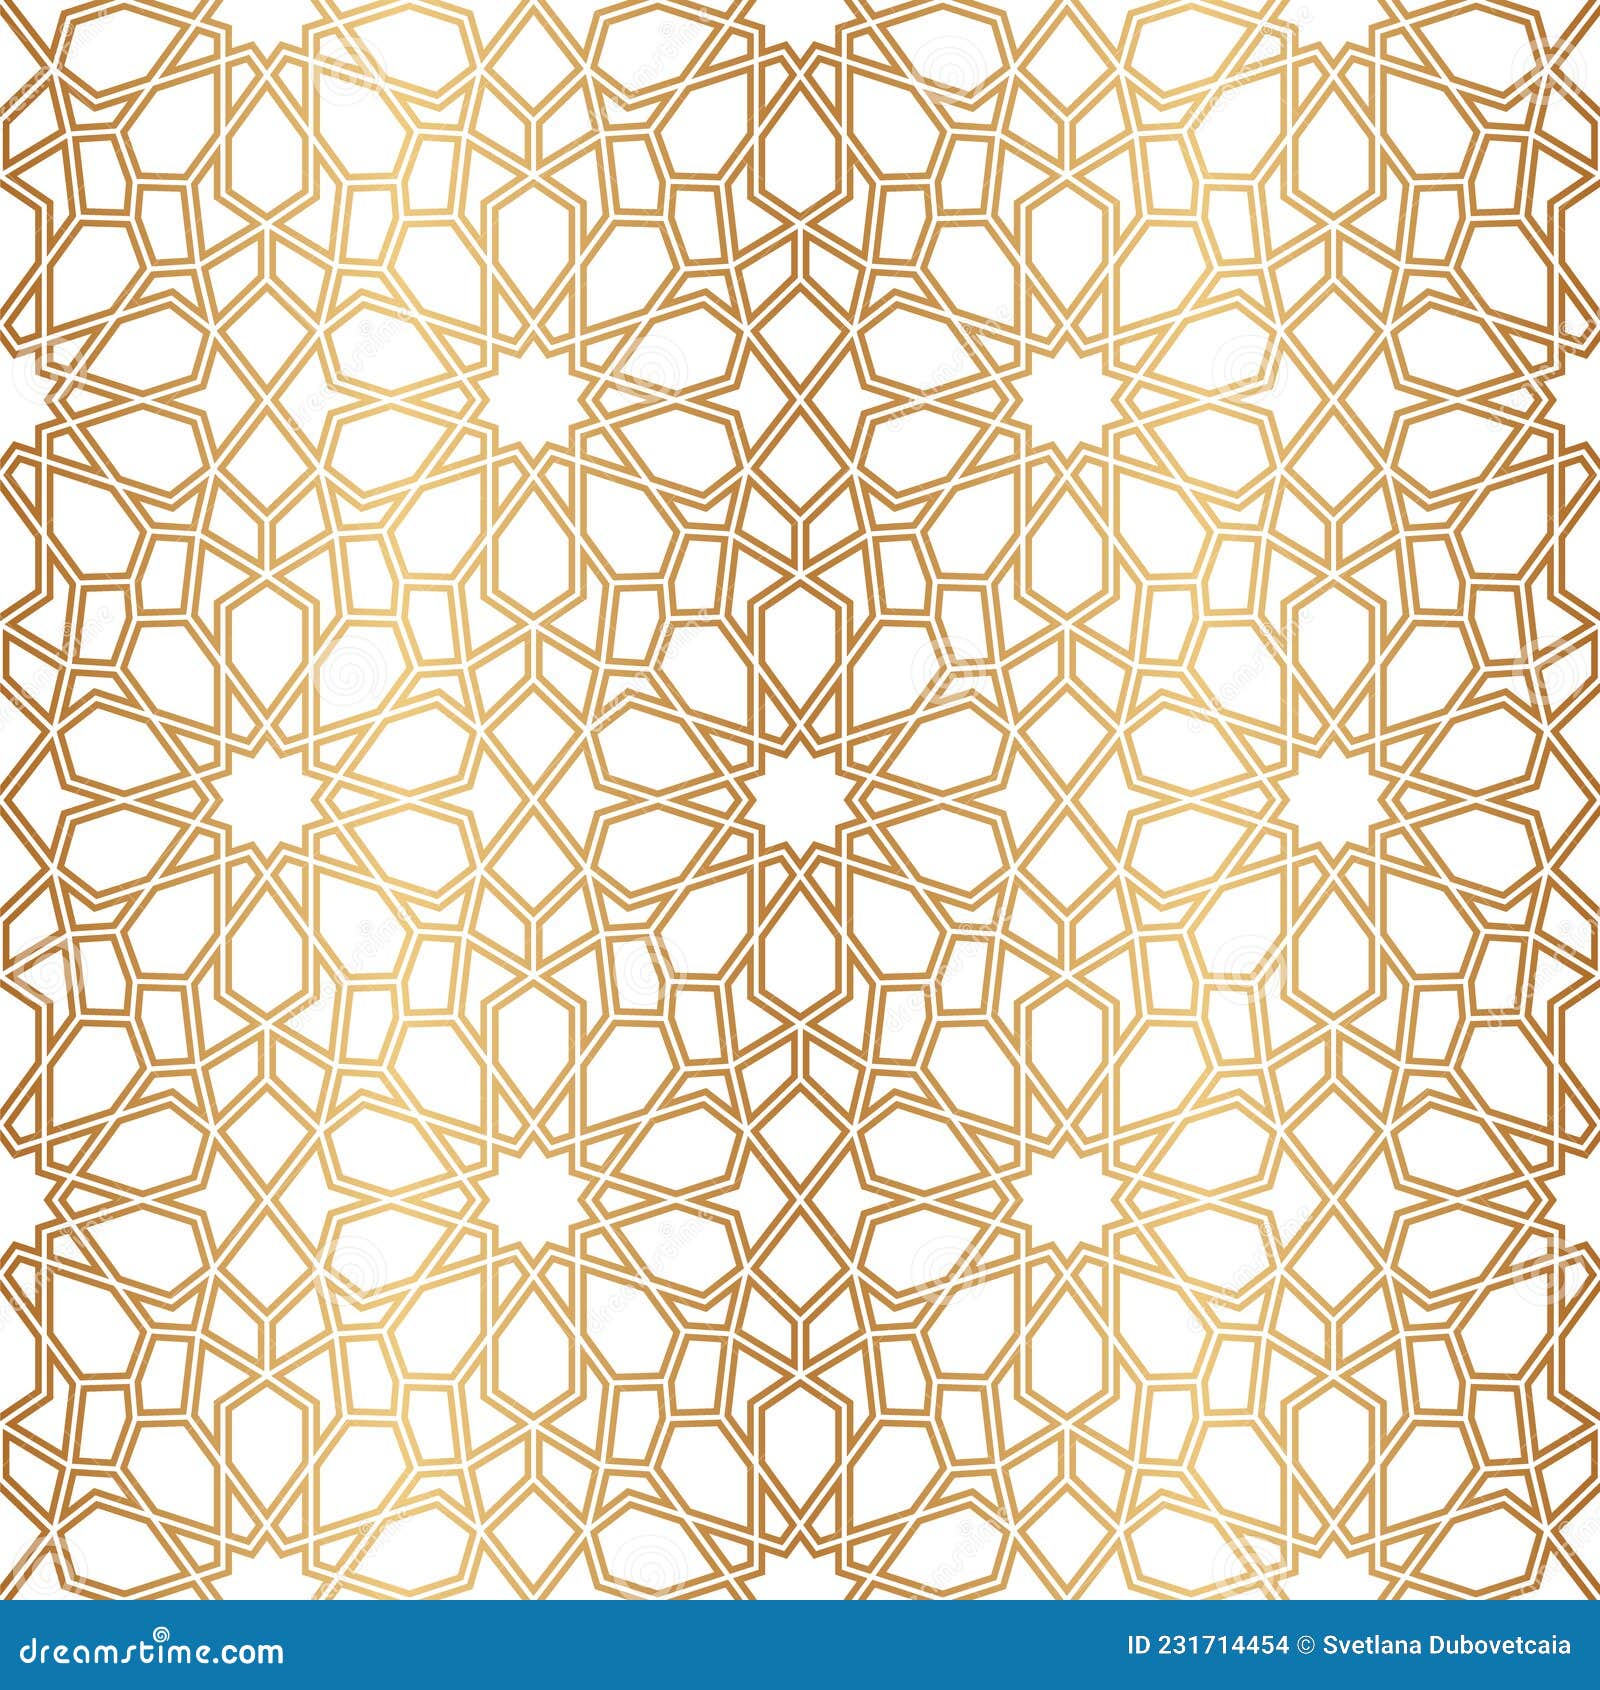 morocco seamless pattern. gold ottoman motif. golden islamic background. repeated arabic star patern. repeating traditional girih